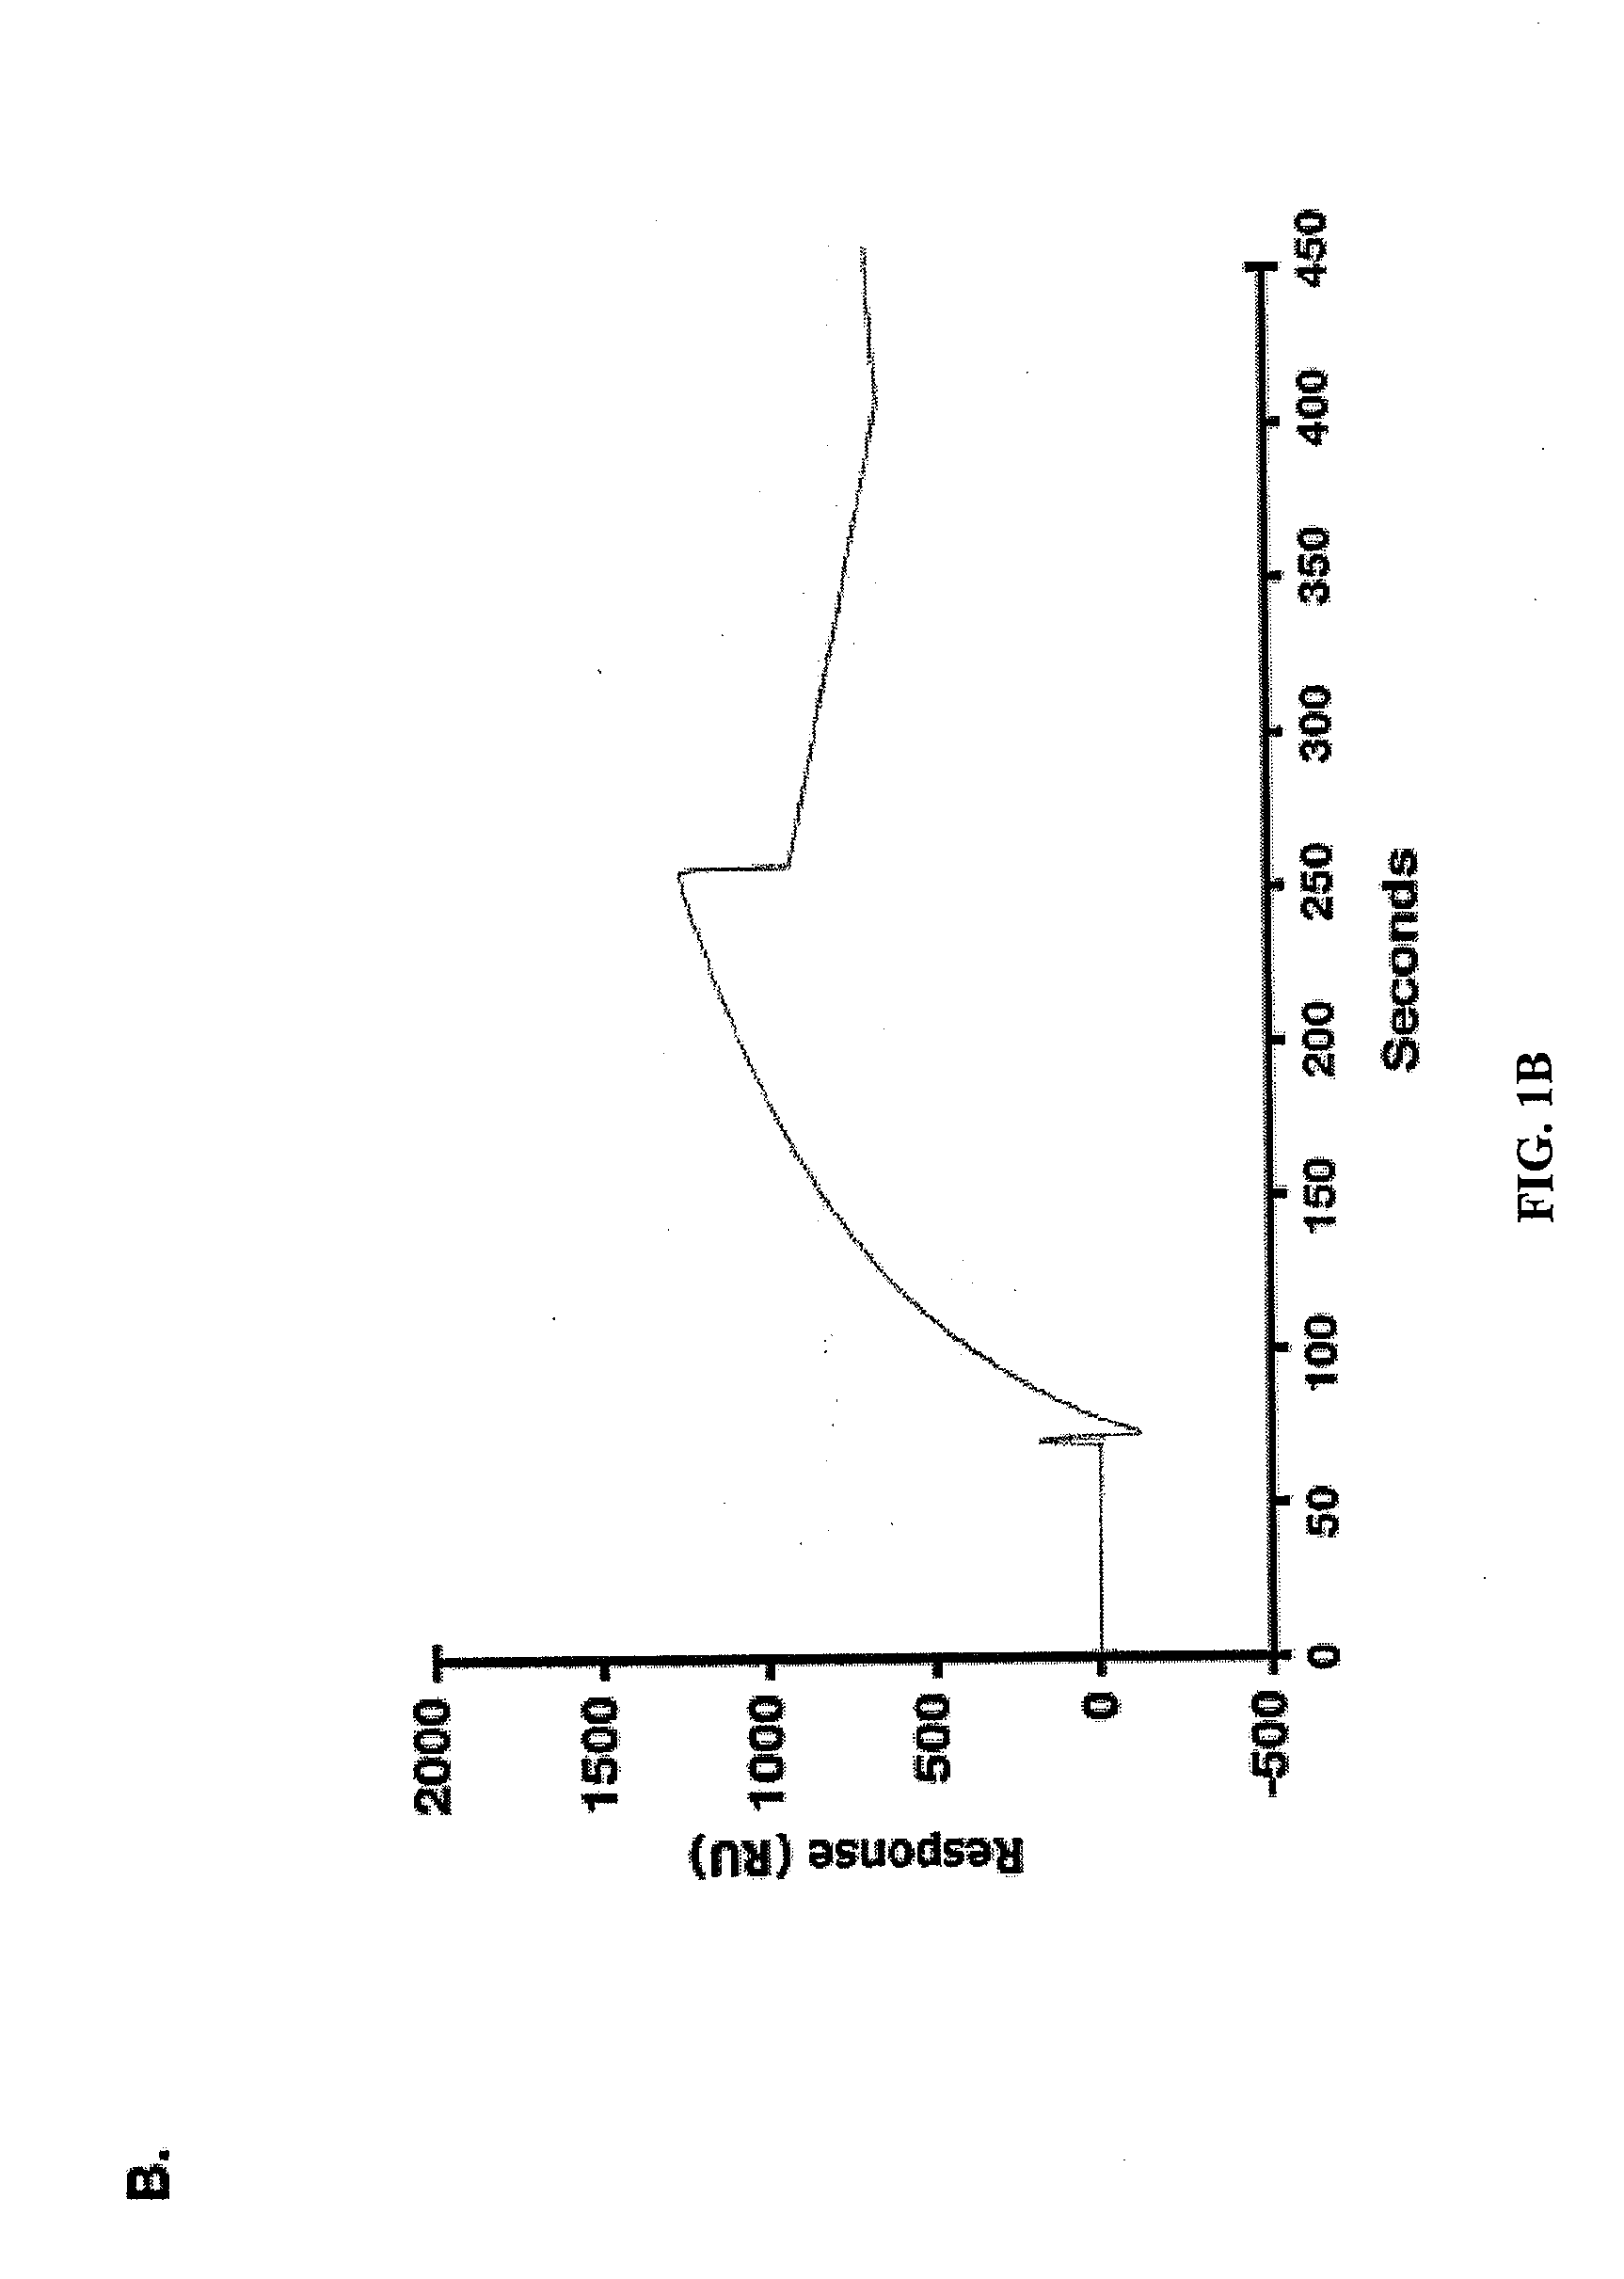 Small molecule inhibitors of muc1 and methods of identifying the same